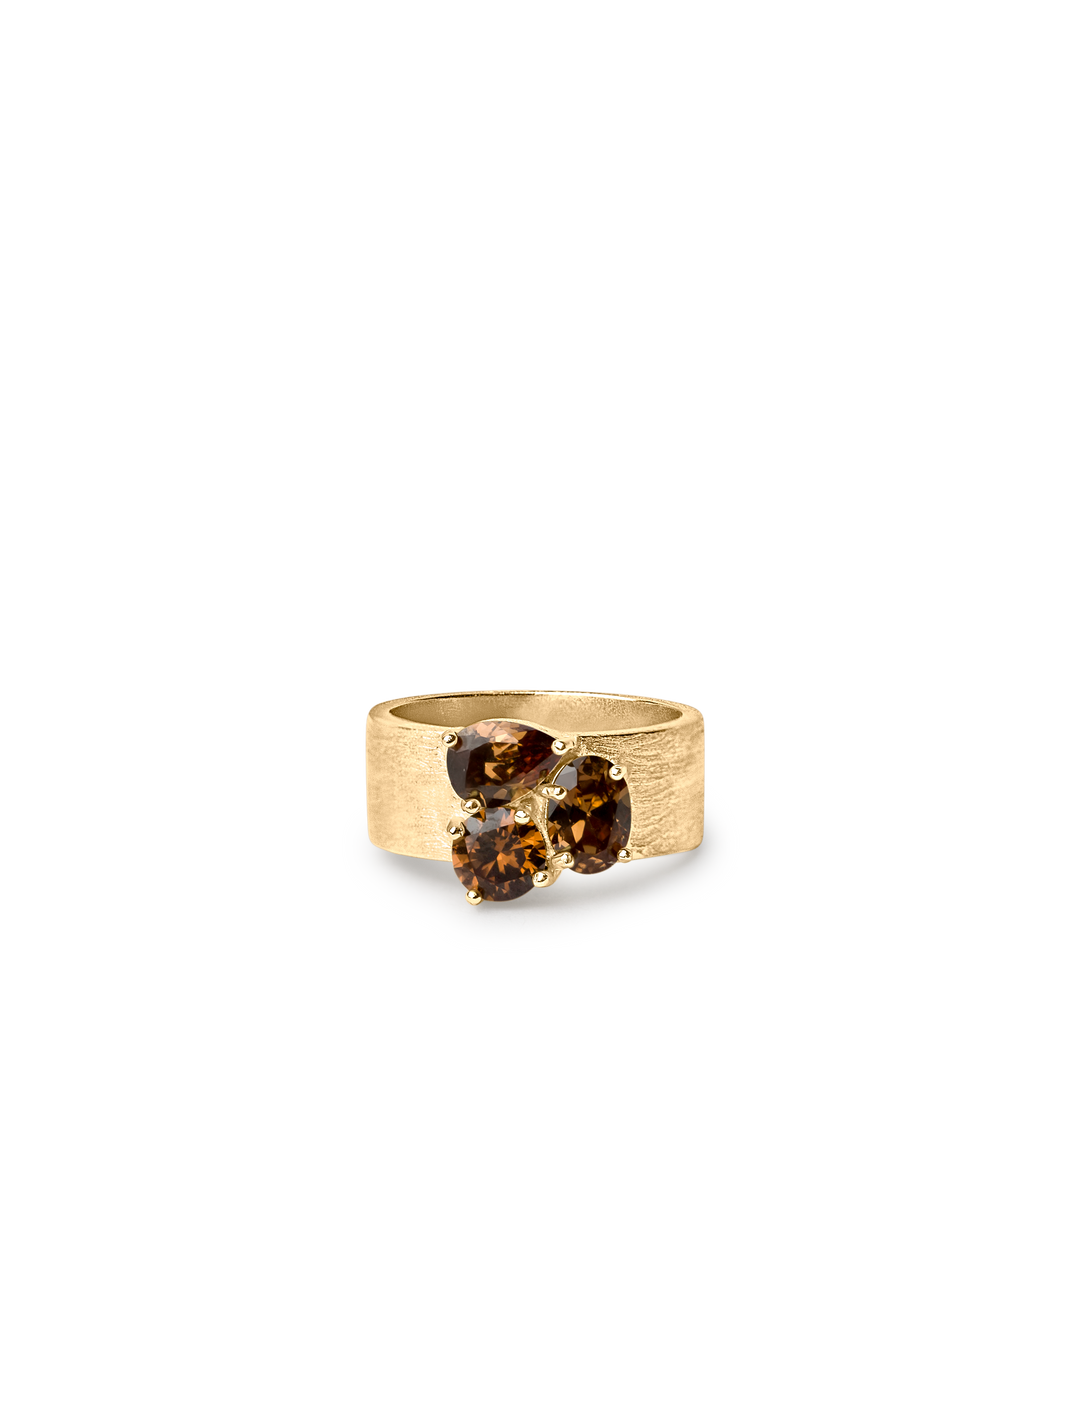 Grace Diamond Ring Brown by Felicia Wedin, 18k gold plated brass